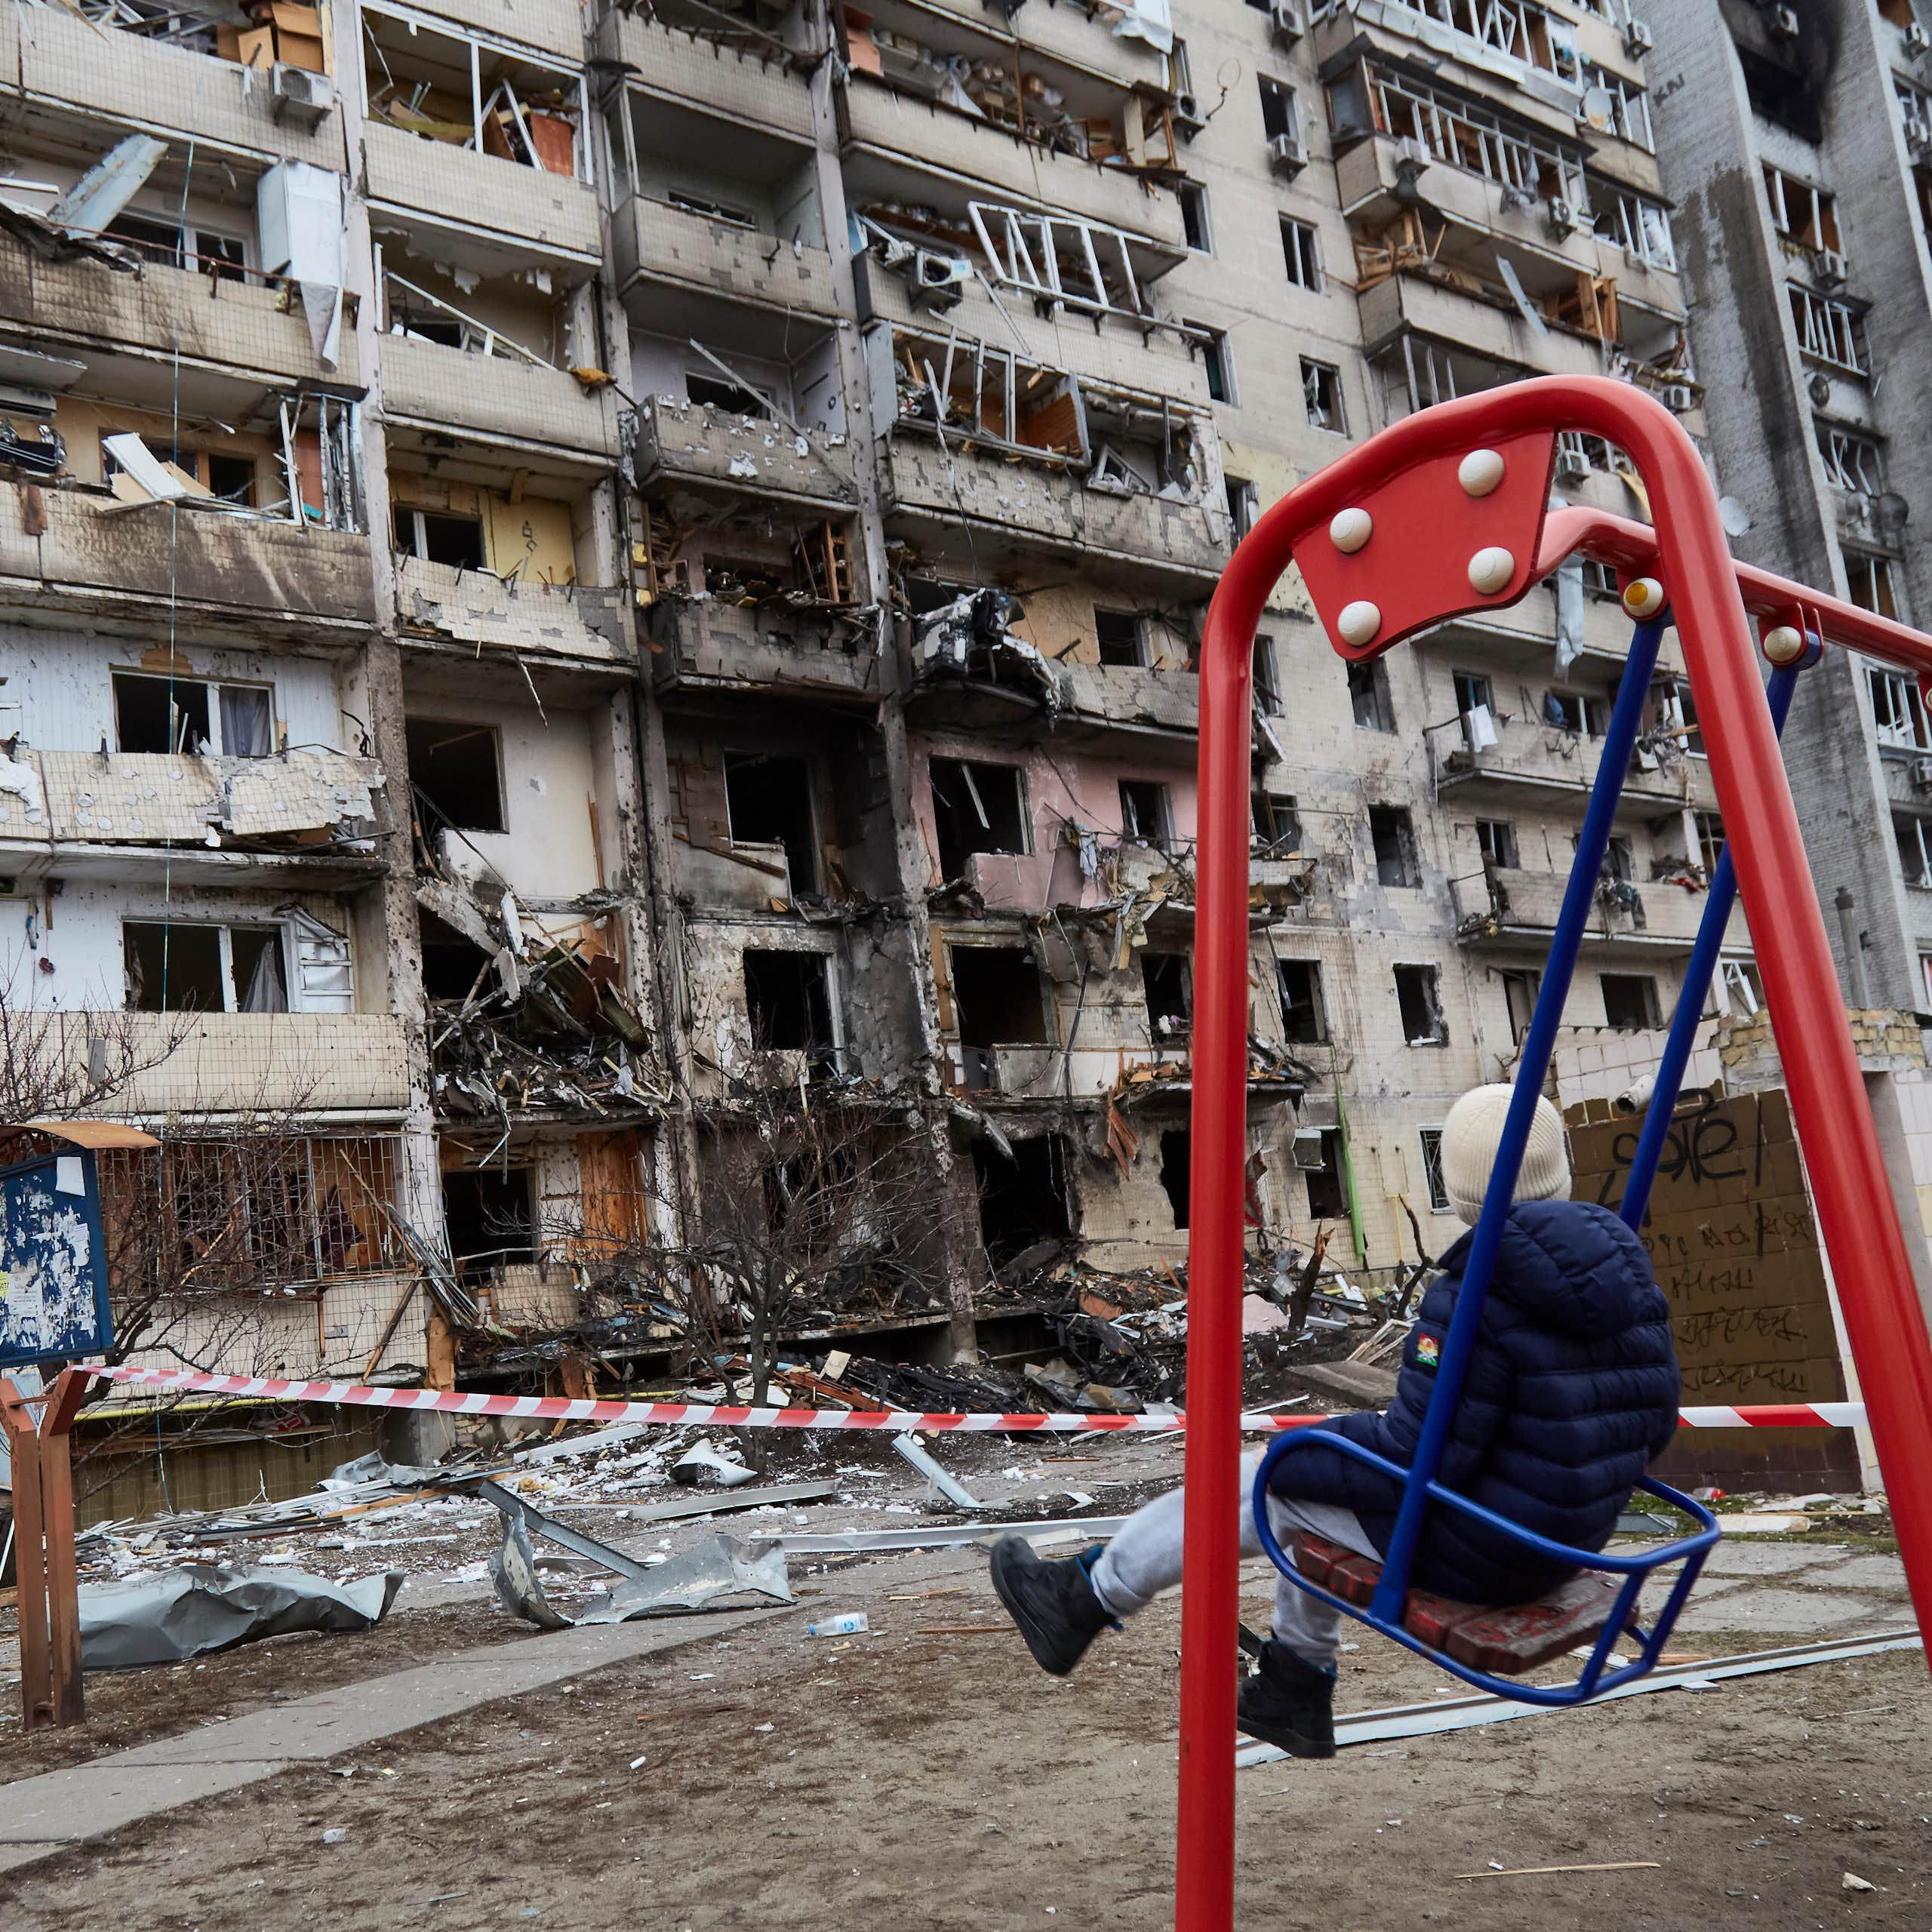 A child on a swing looks at a destroyed building.